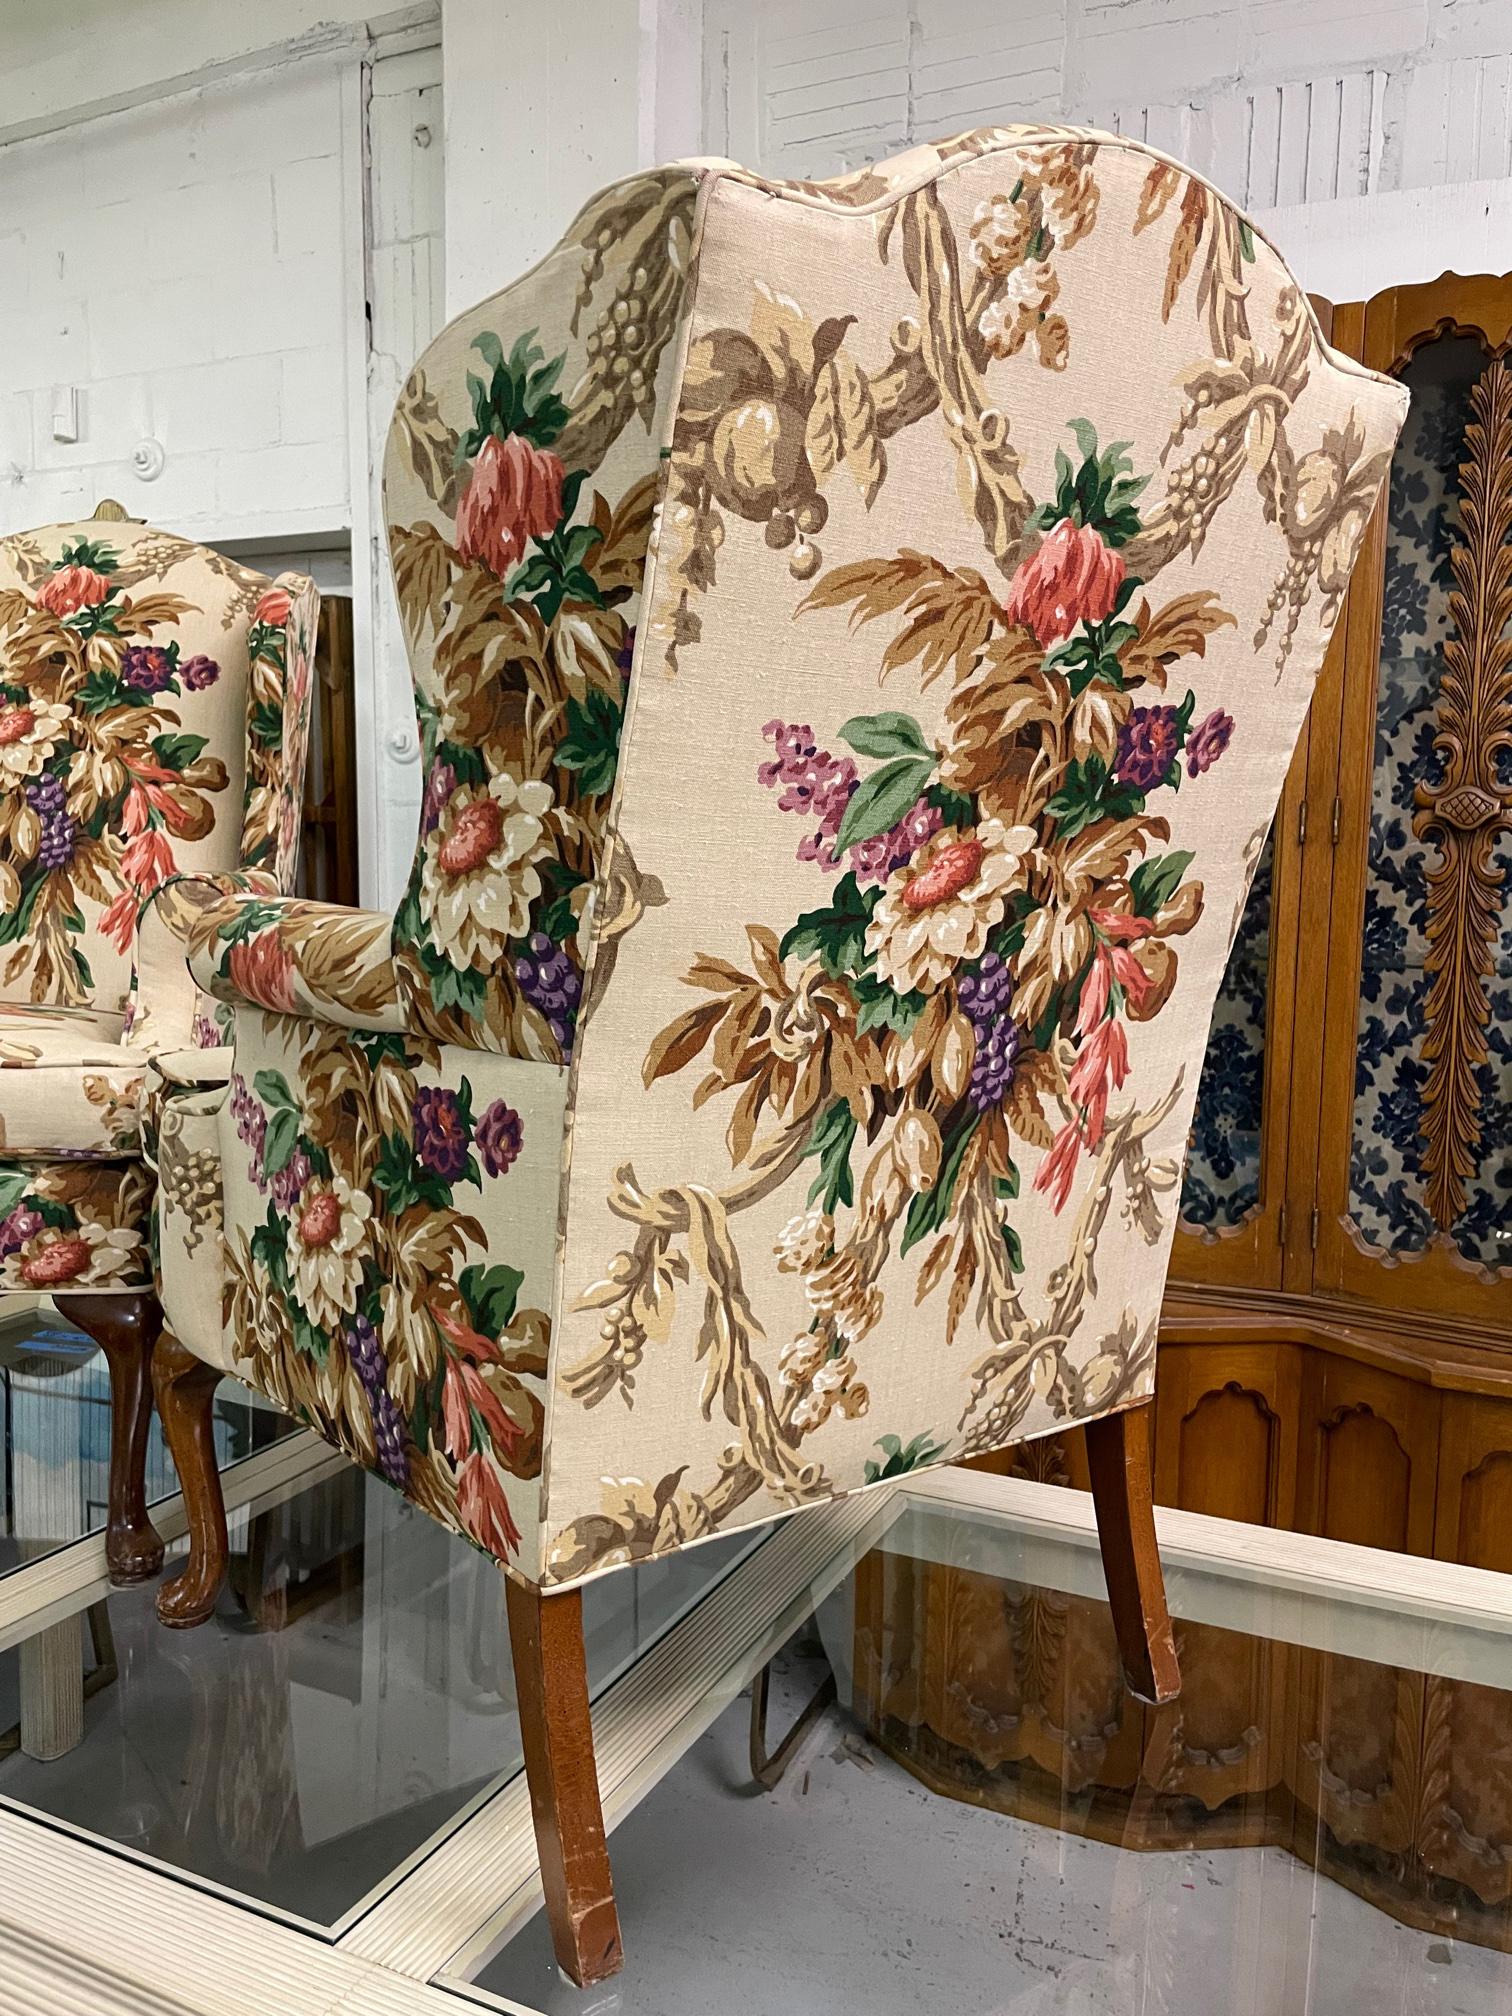 vintage floral chairs